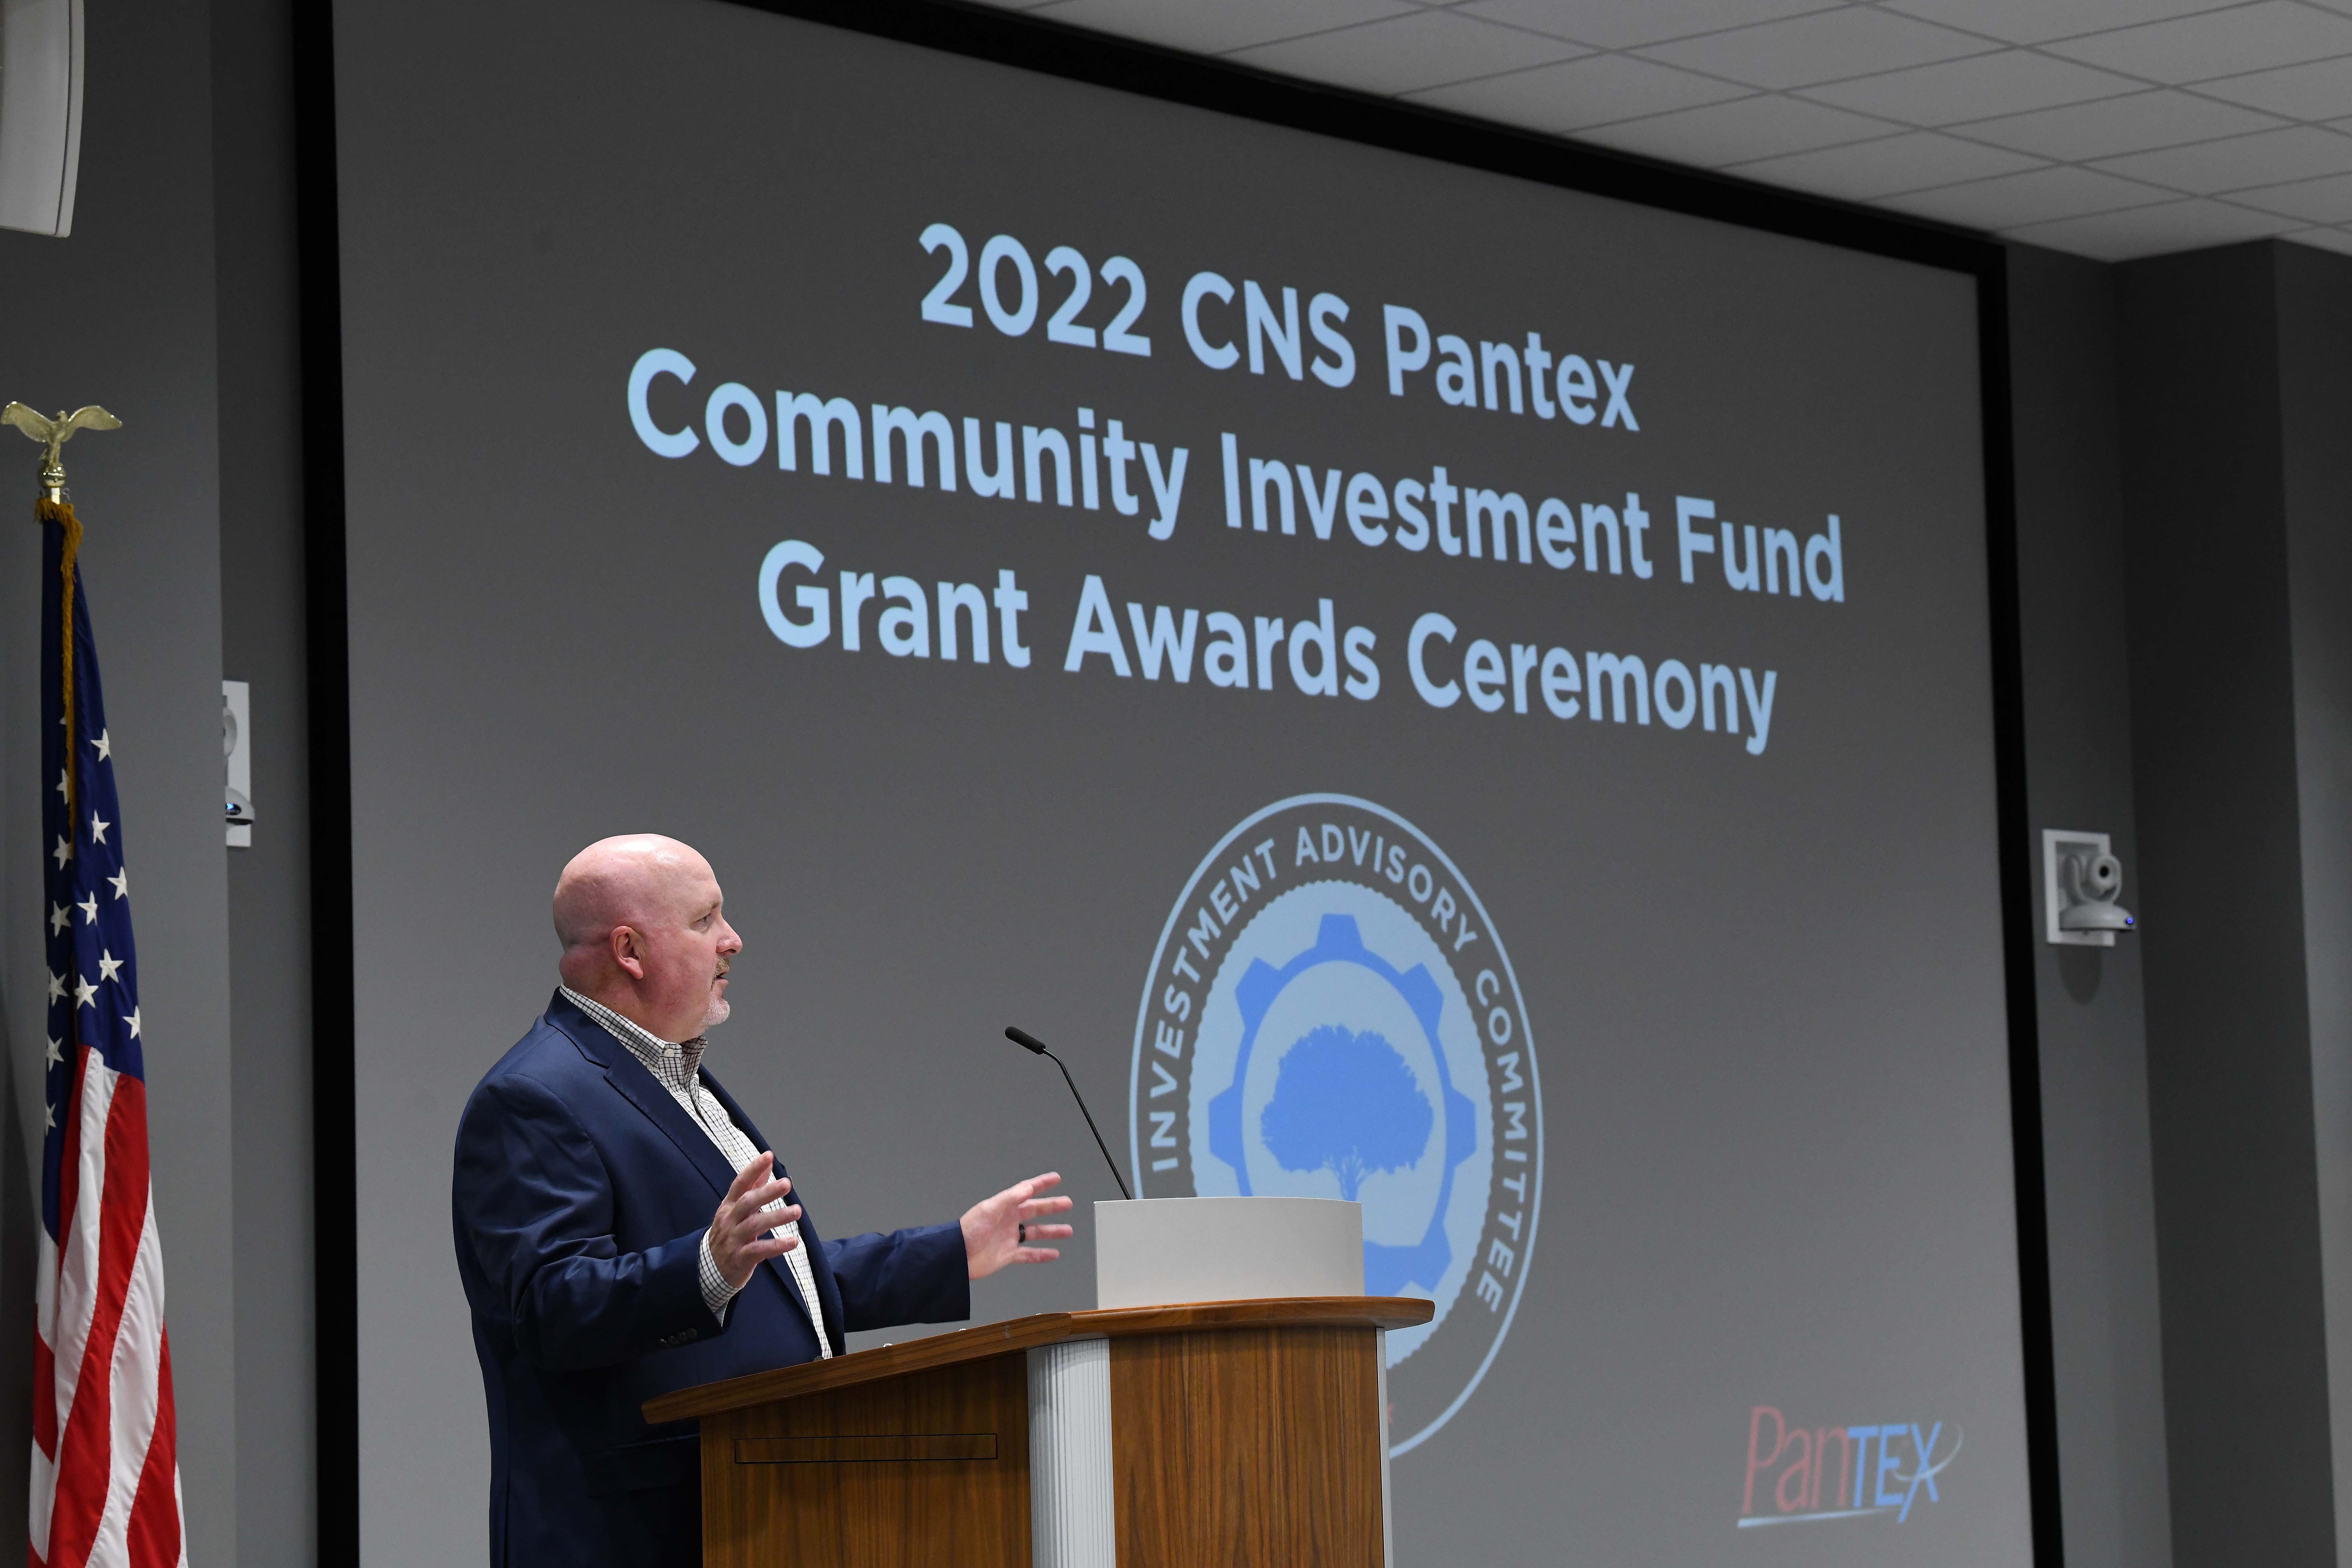 Kenny Steward speaks at the CNS Community Investment Grant Ceremony held at Pantex August 24